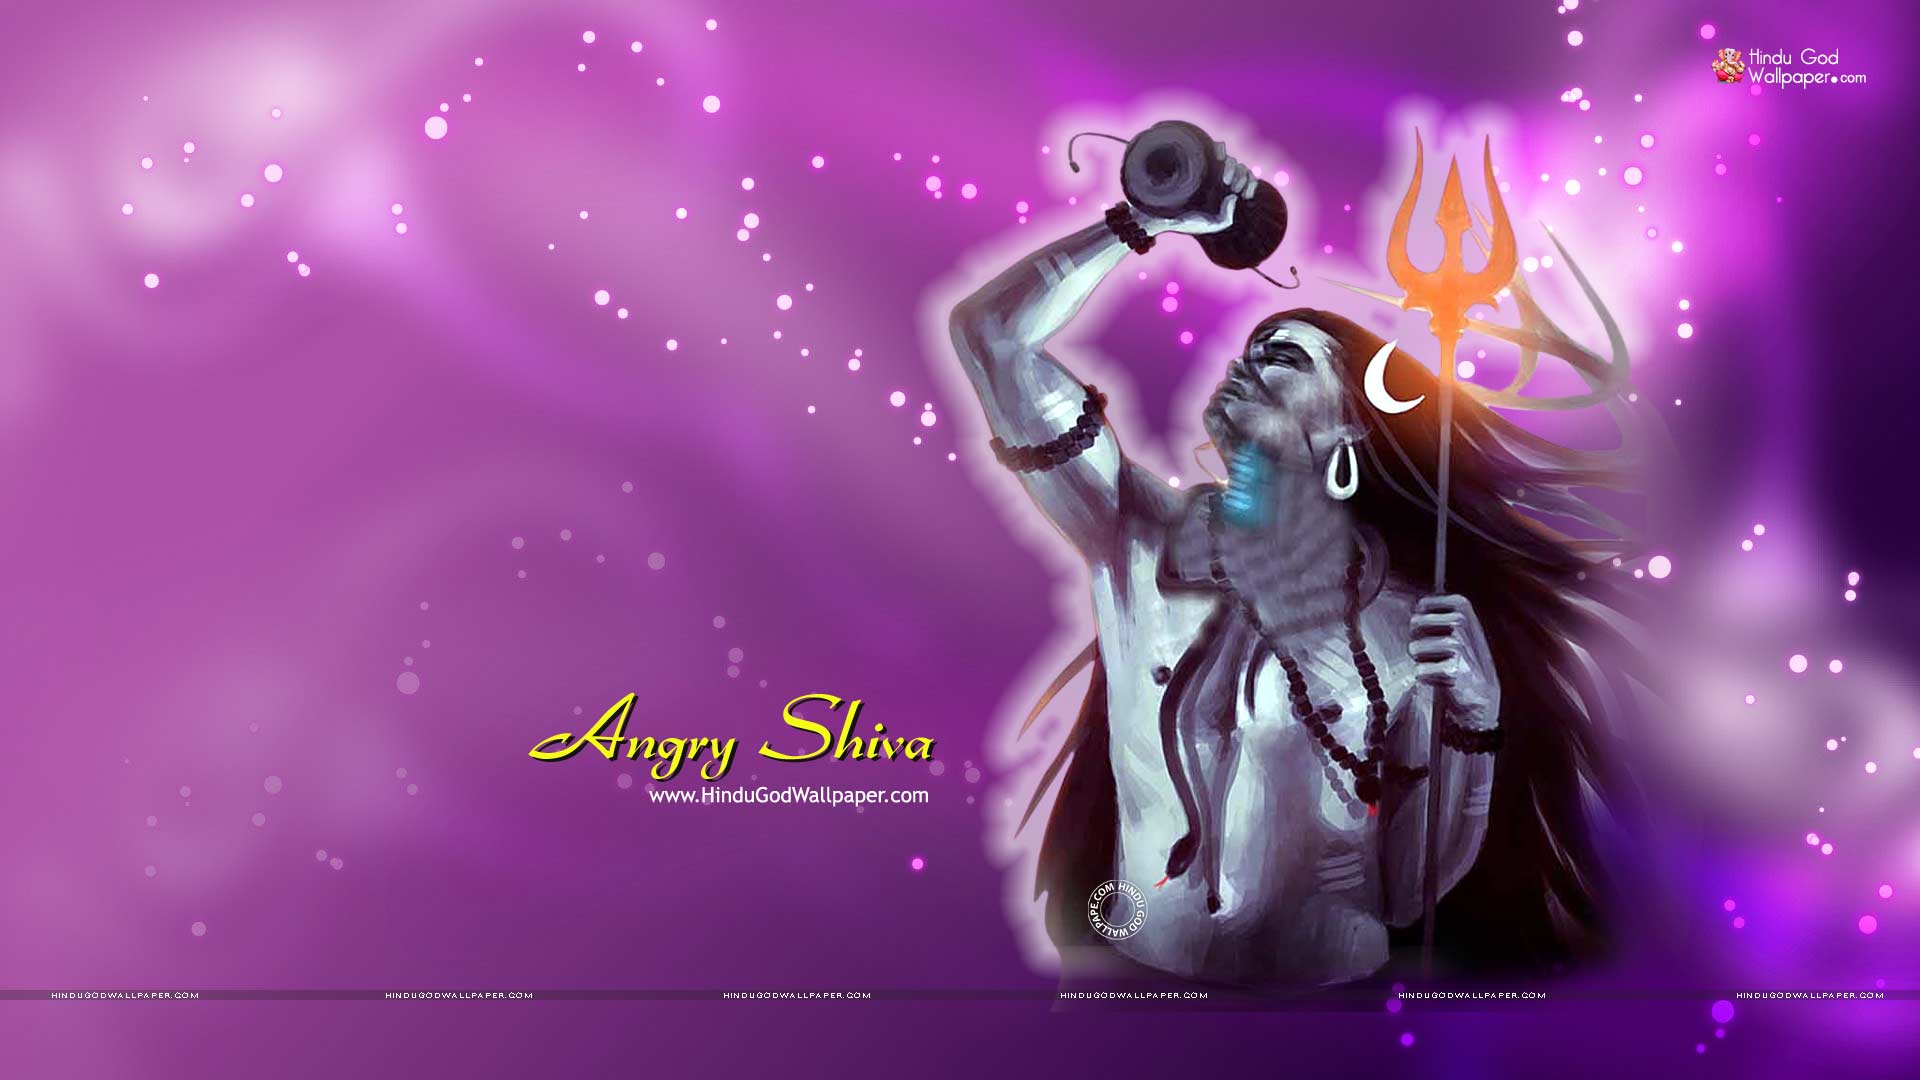 Angry Shiva HD Wallpaper 1080p Image Full Size Free Download